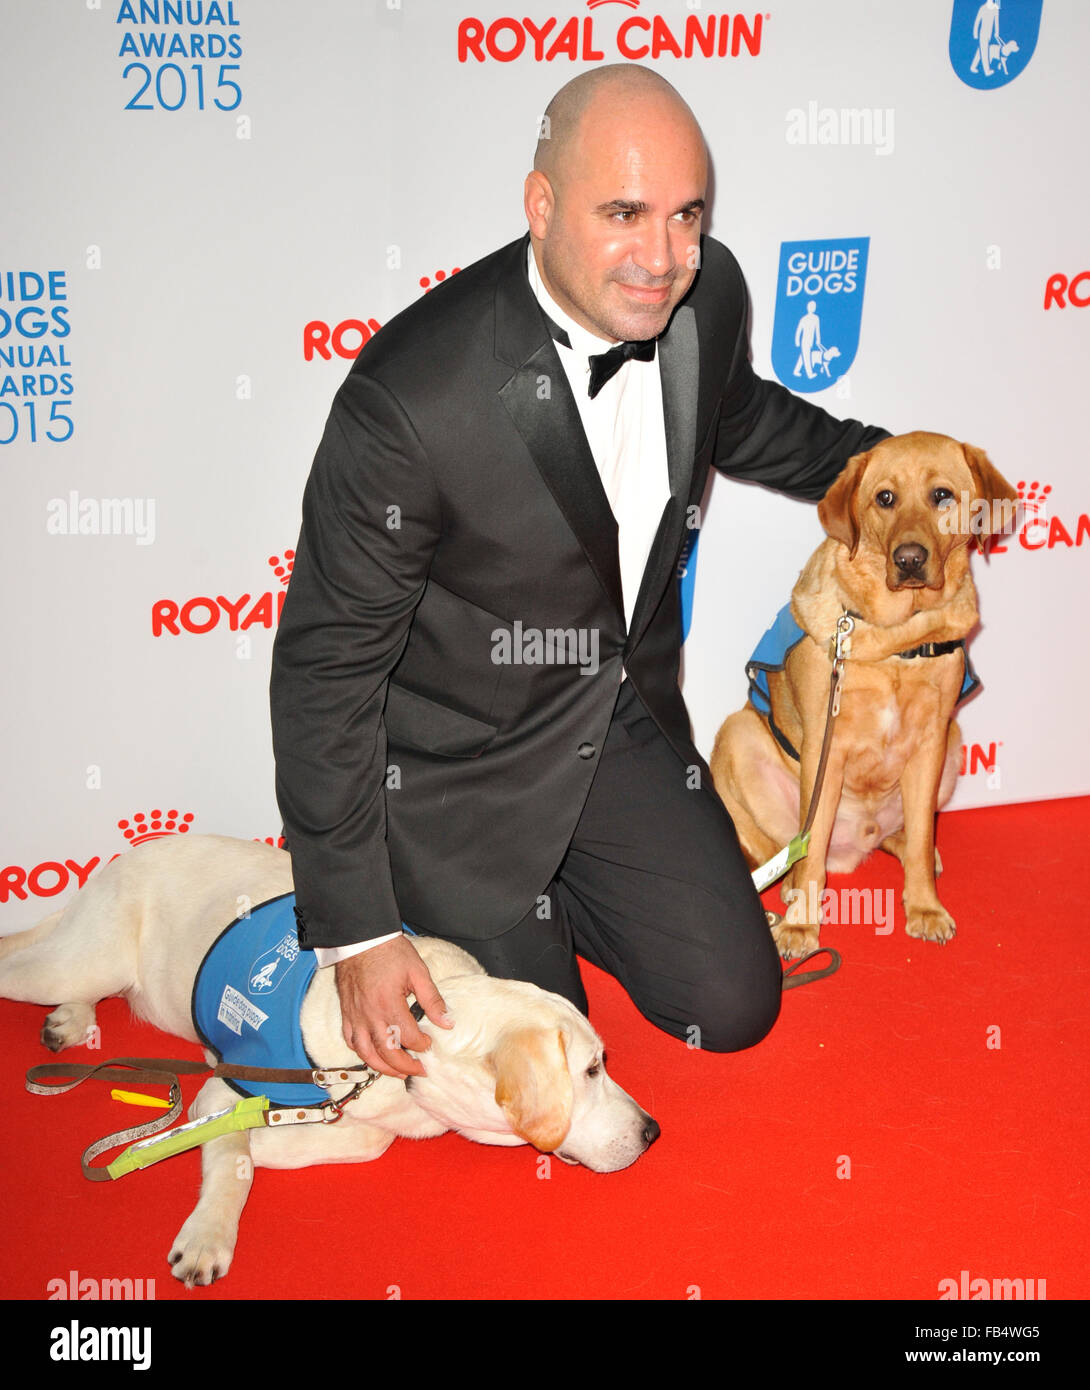 The Guide Dogs For The Blind Association annual awards 2015 at the Hilton - Arrivals  Featuring: Marc Abrahams Where: London, United Kingdom When: 09 Dec 2015 Stock Photo